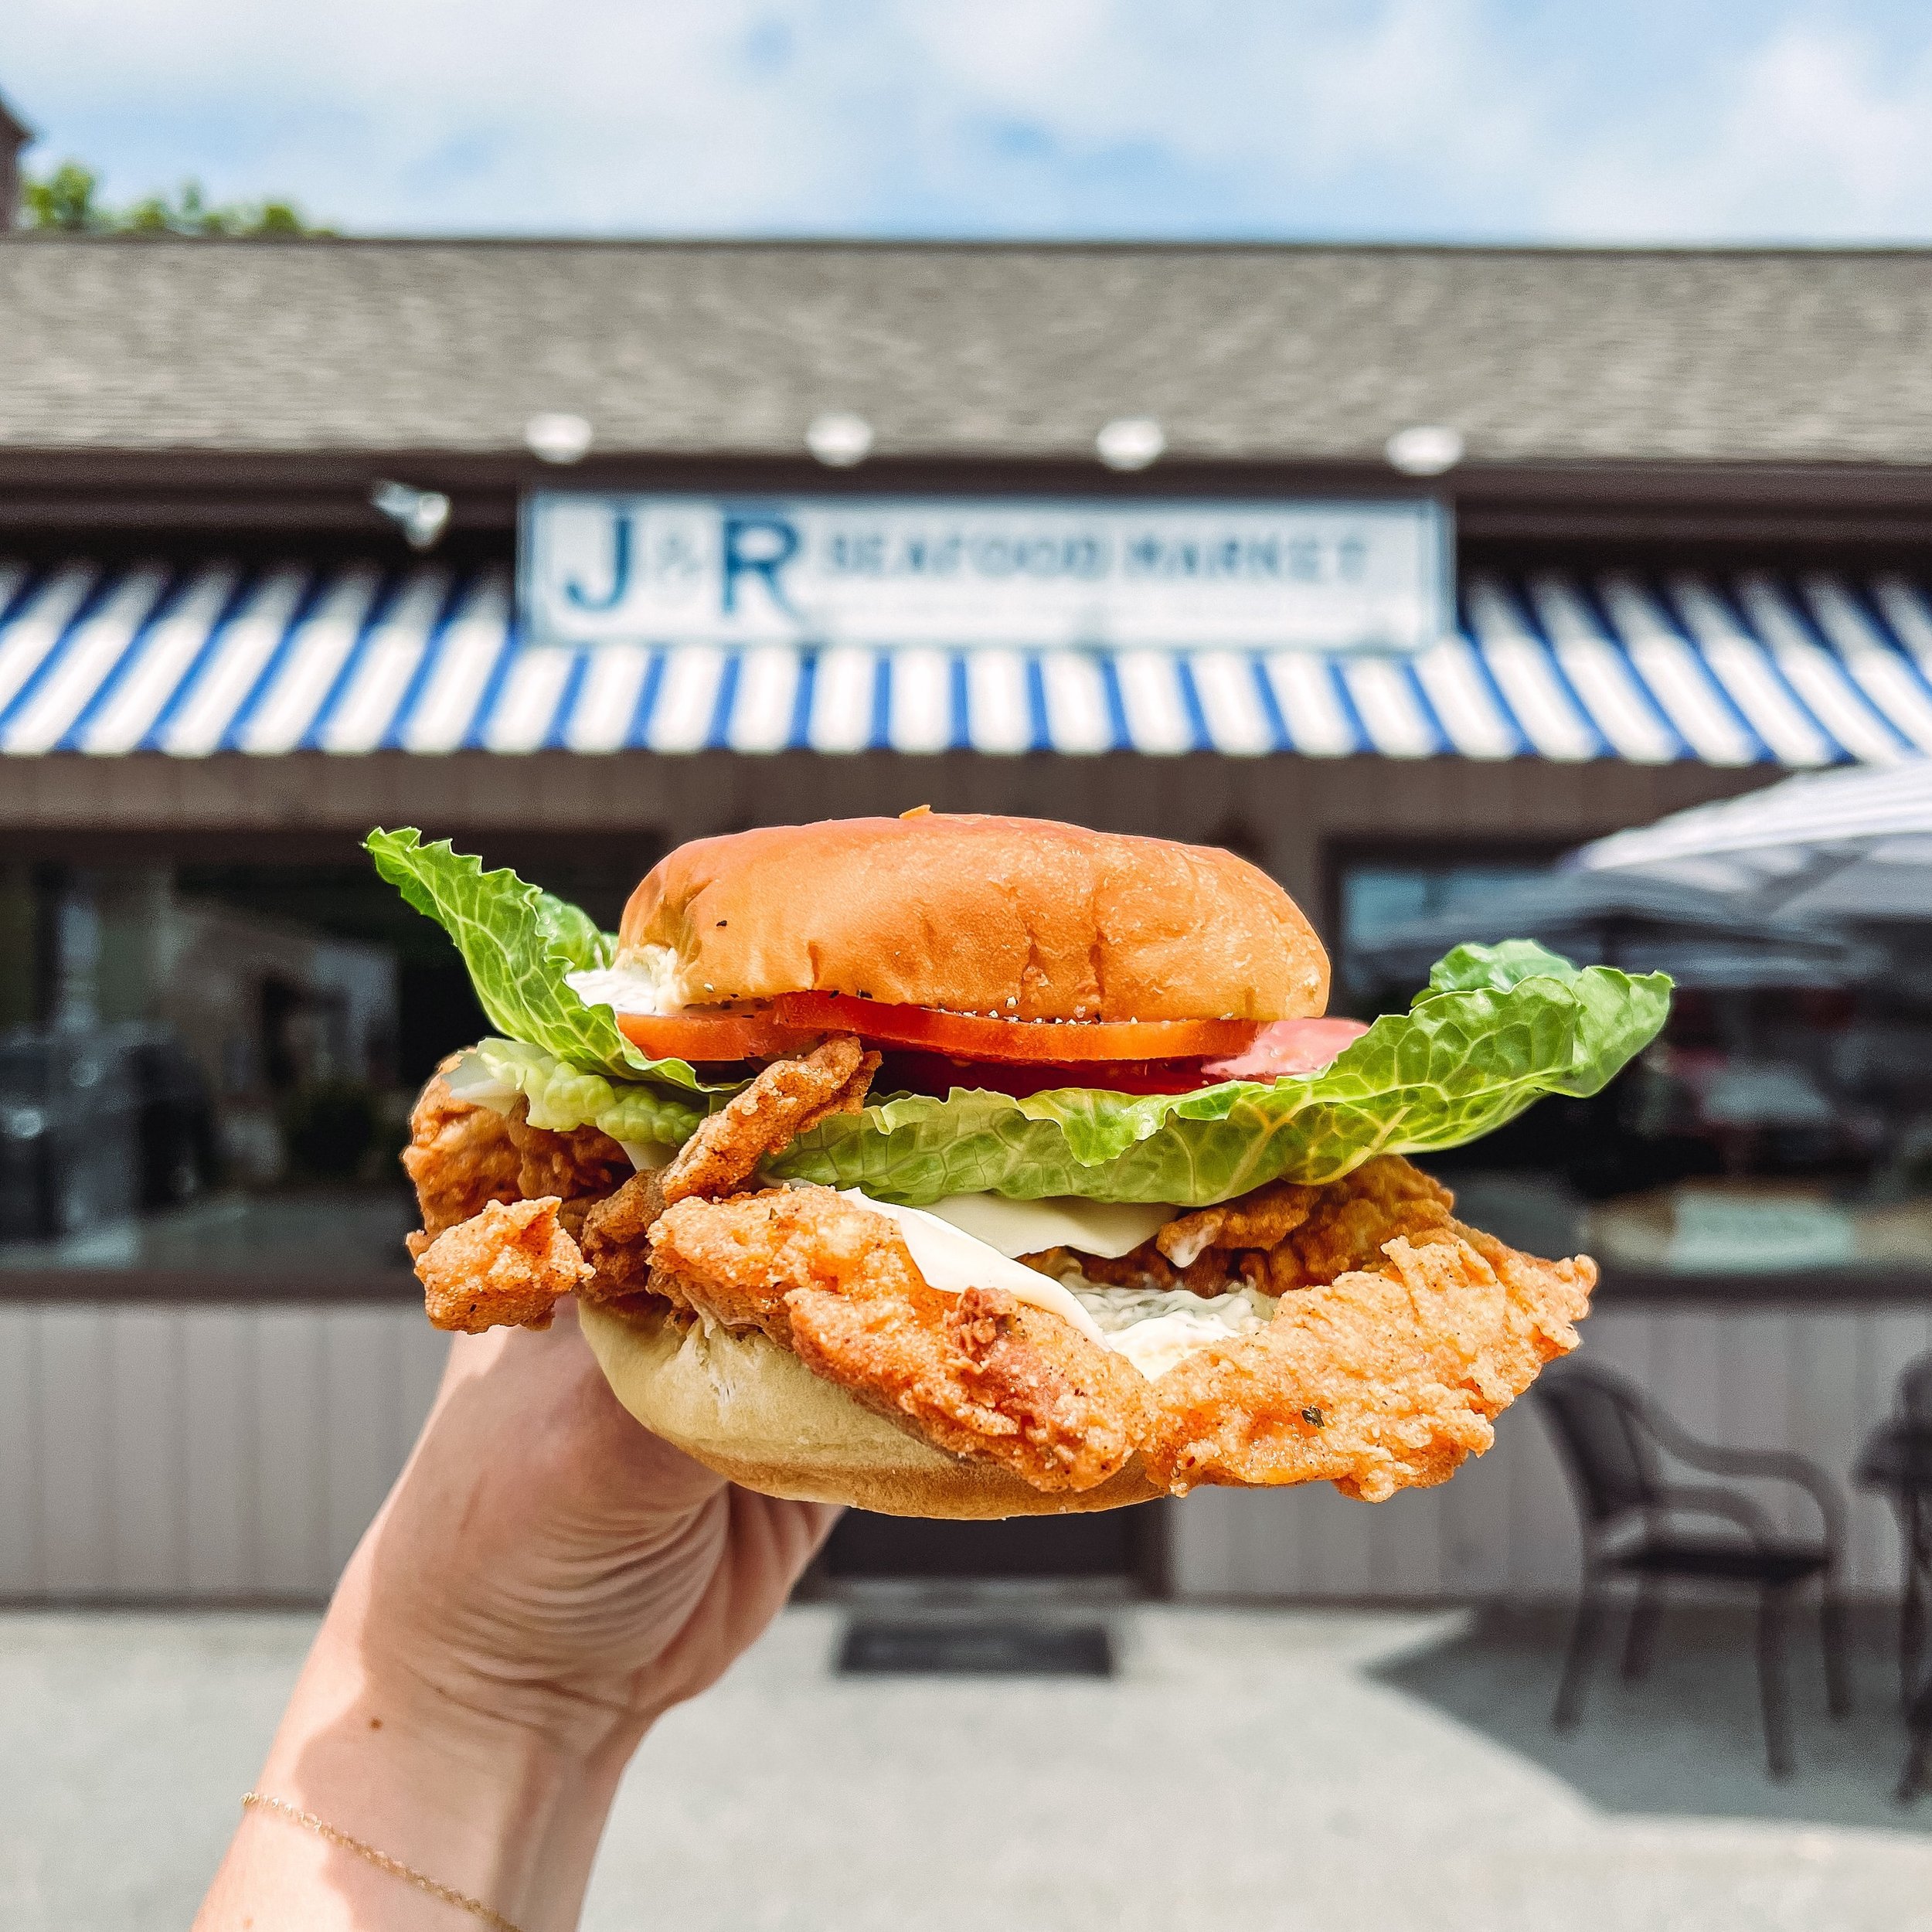 Soft shell season is back! 🦀 Our Fried SS Crab Sandwich available all weekend long! 

#jrseafoodmarket #mysticct #seafoodie #seafoodmarket #fishmarket #softshellcrabs #friedsoftshellcrab #crabsandwich